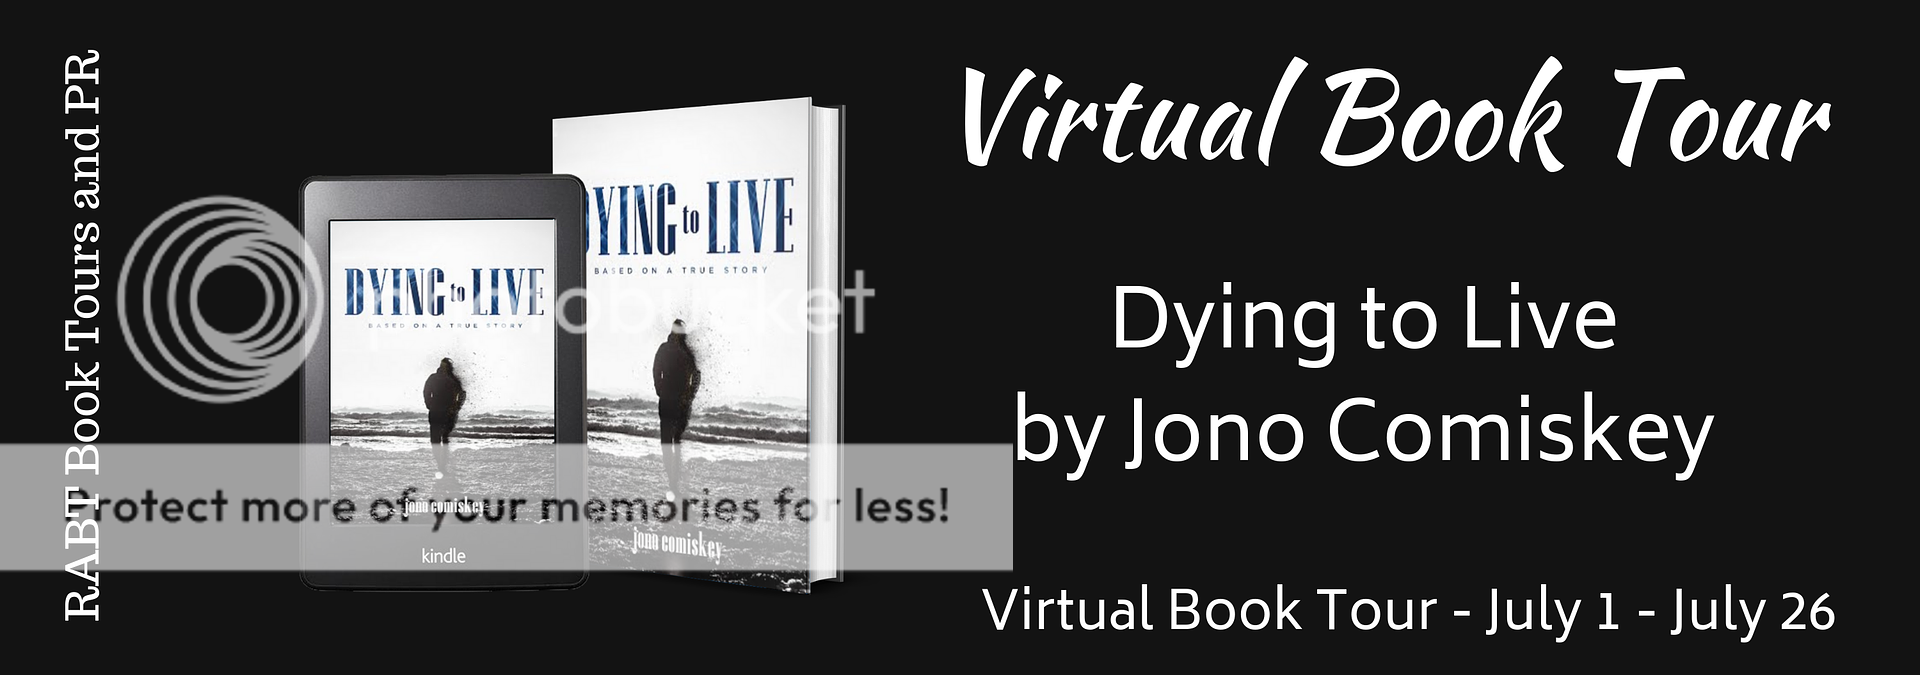 Virtual Book Tour: Dying to Live by Jono Comiskey @RABTBookTours #fiction #blogtour #interview 